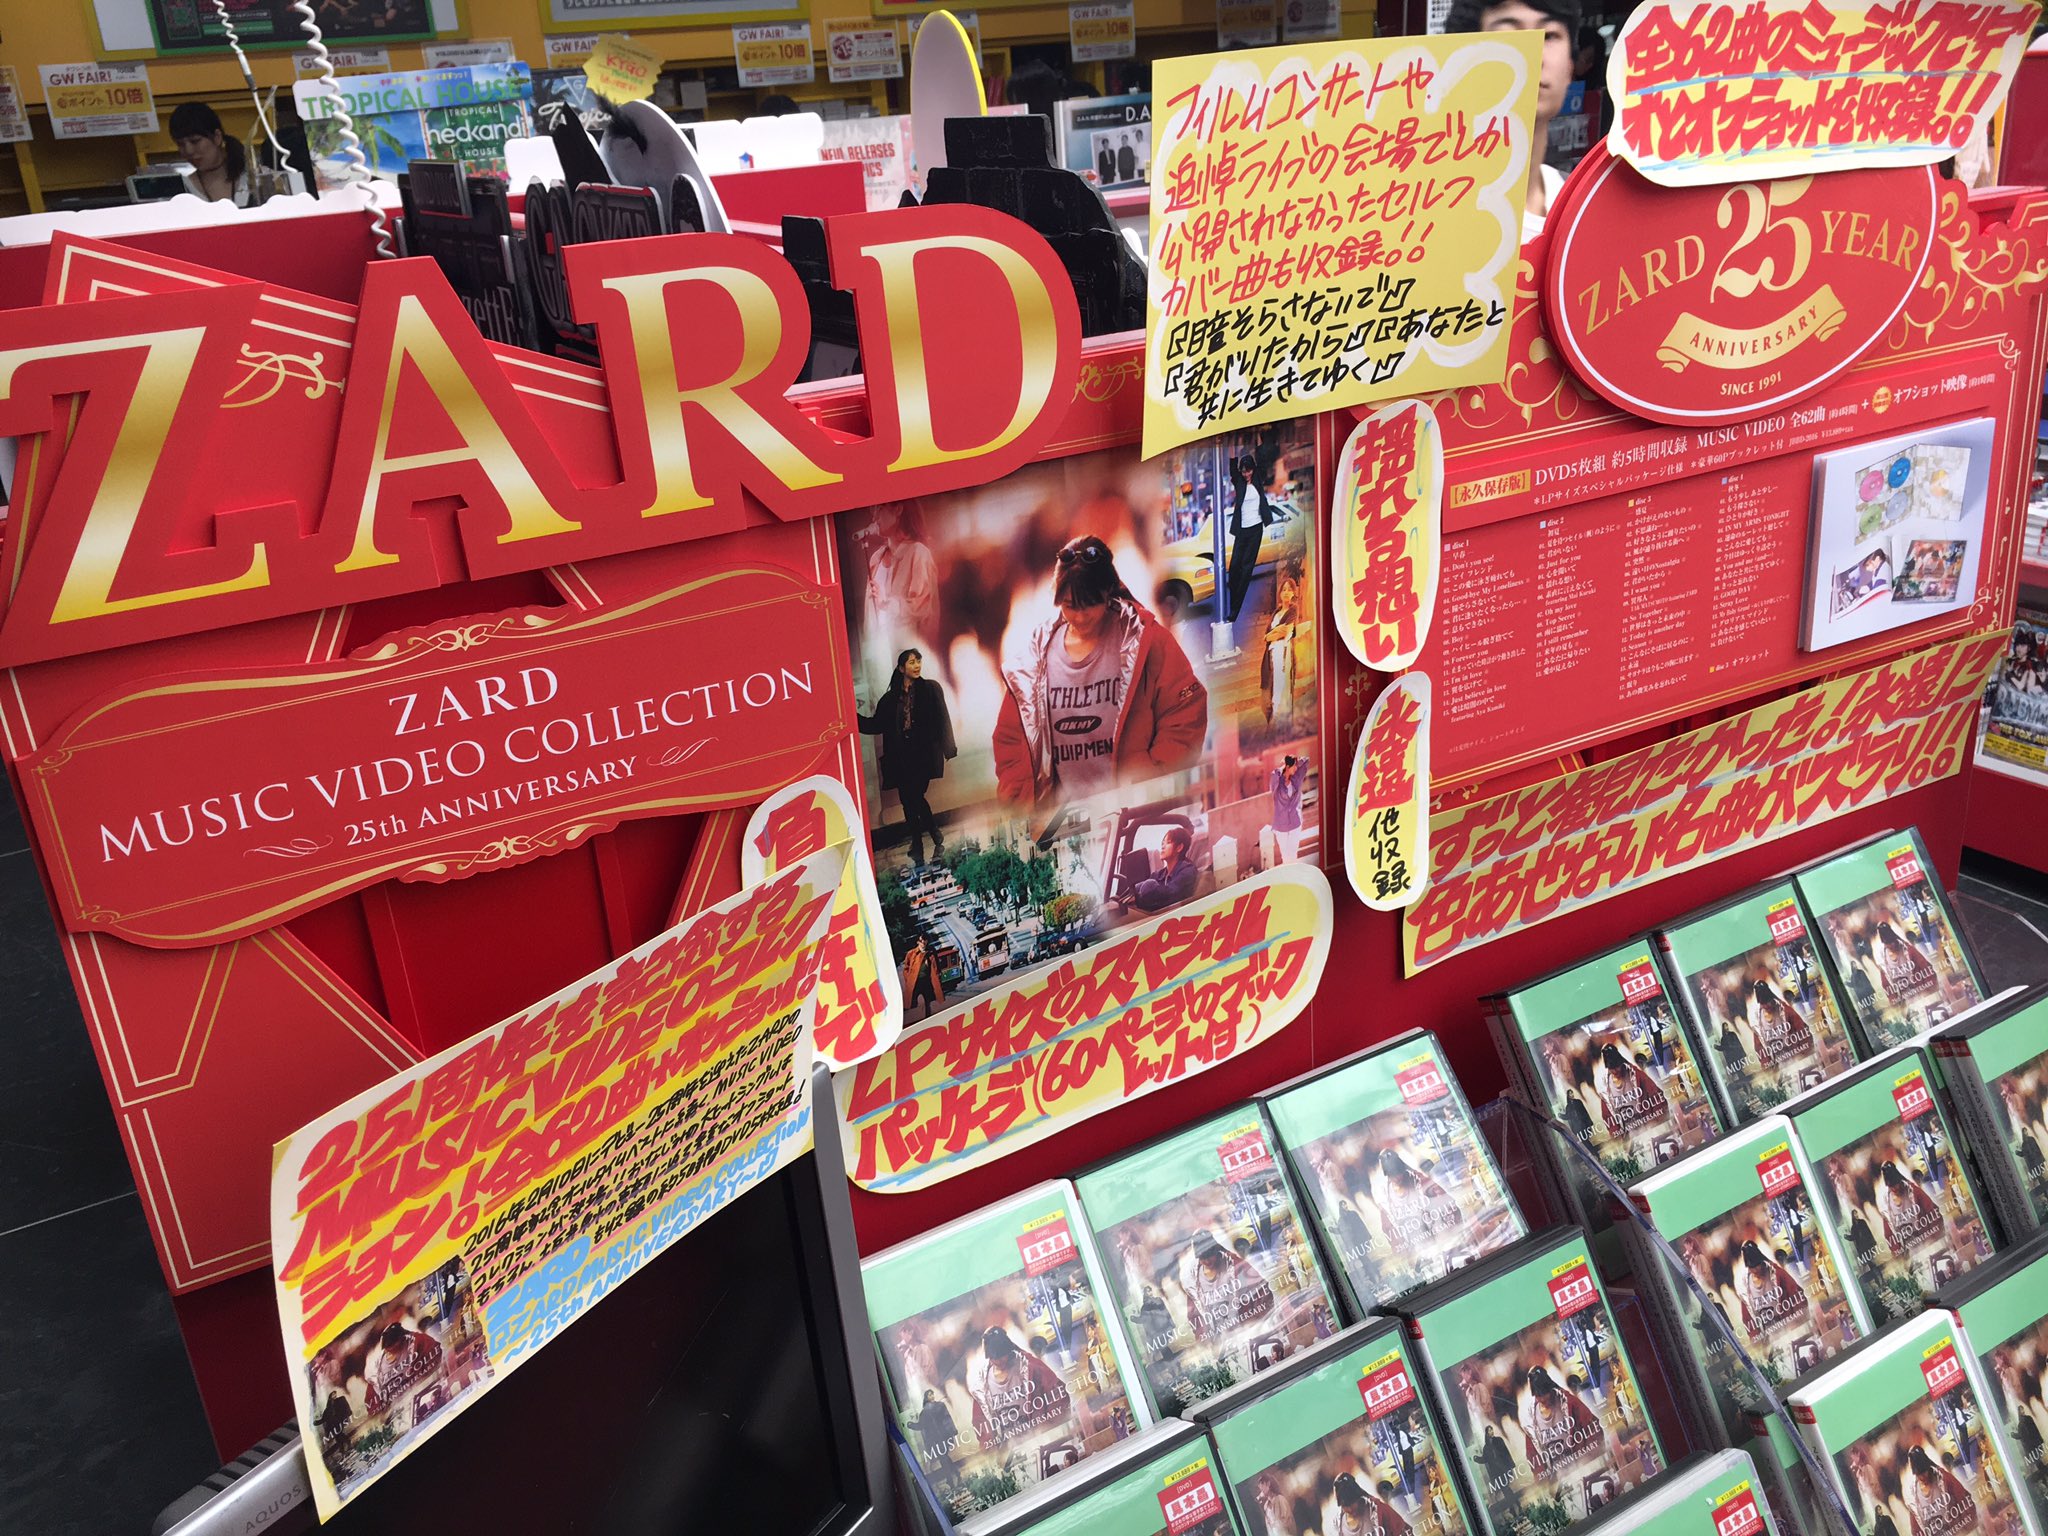 ZARD MUSIC VIDEO COLLECTION